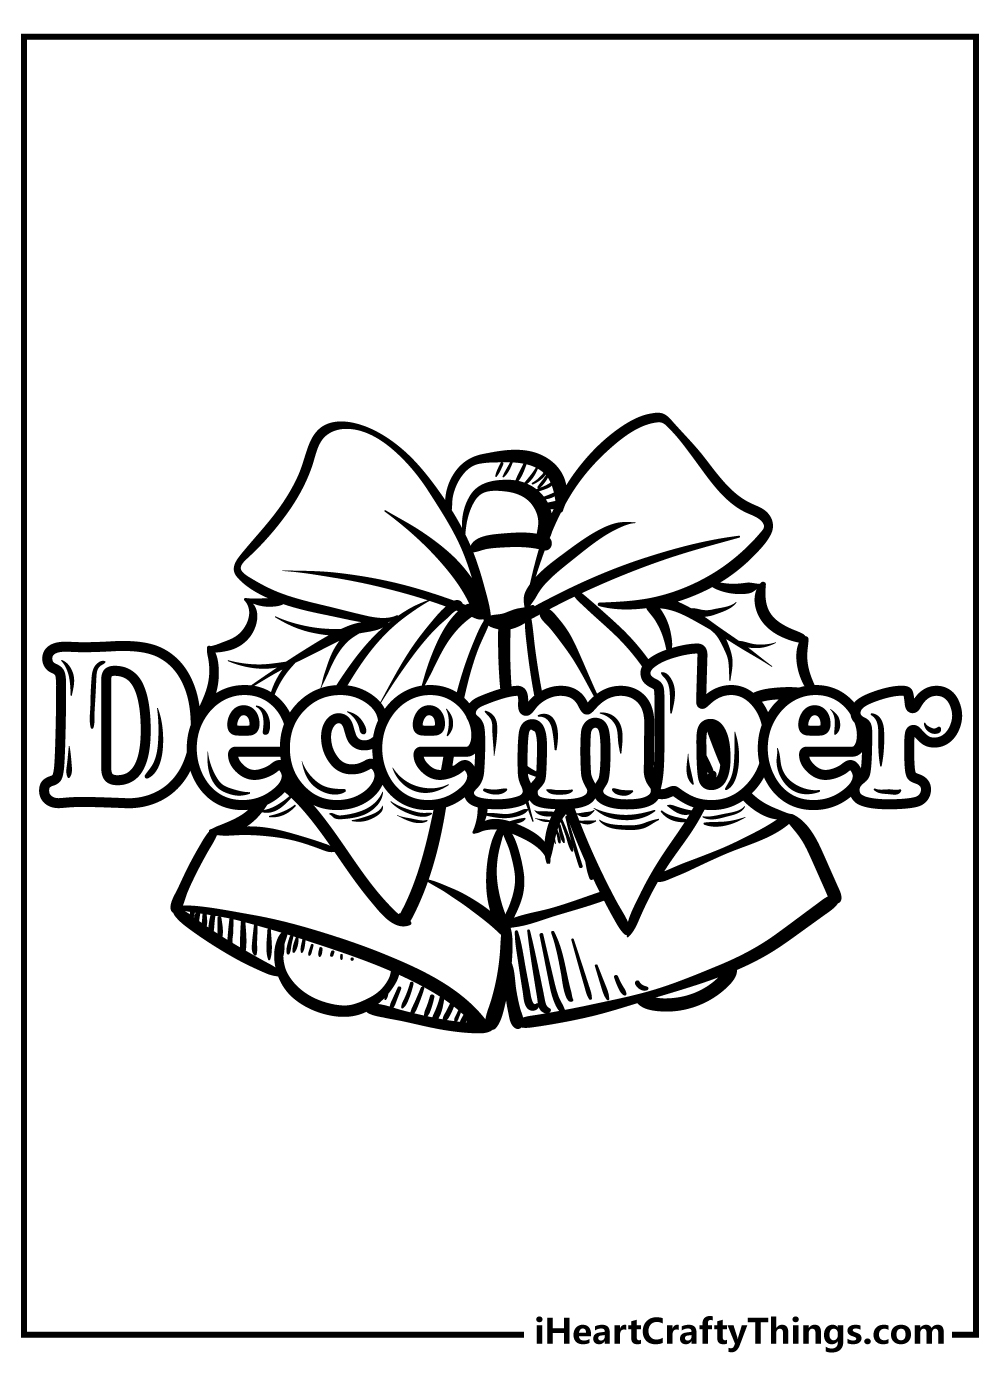 December Coloring Pages for preschoolers free printable